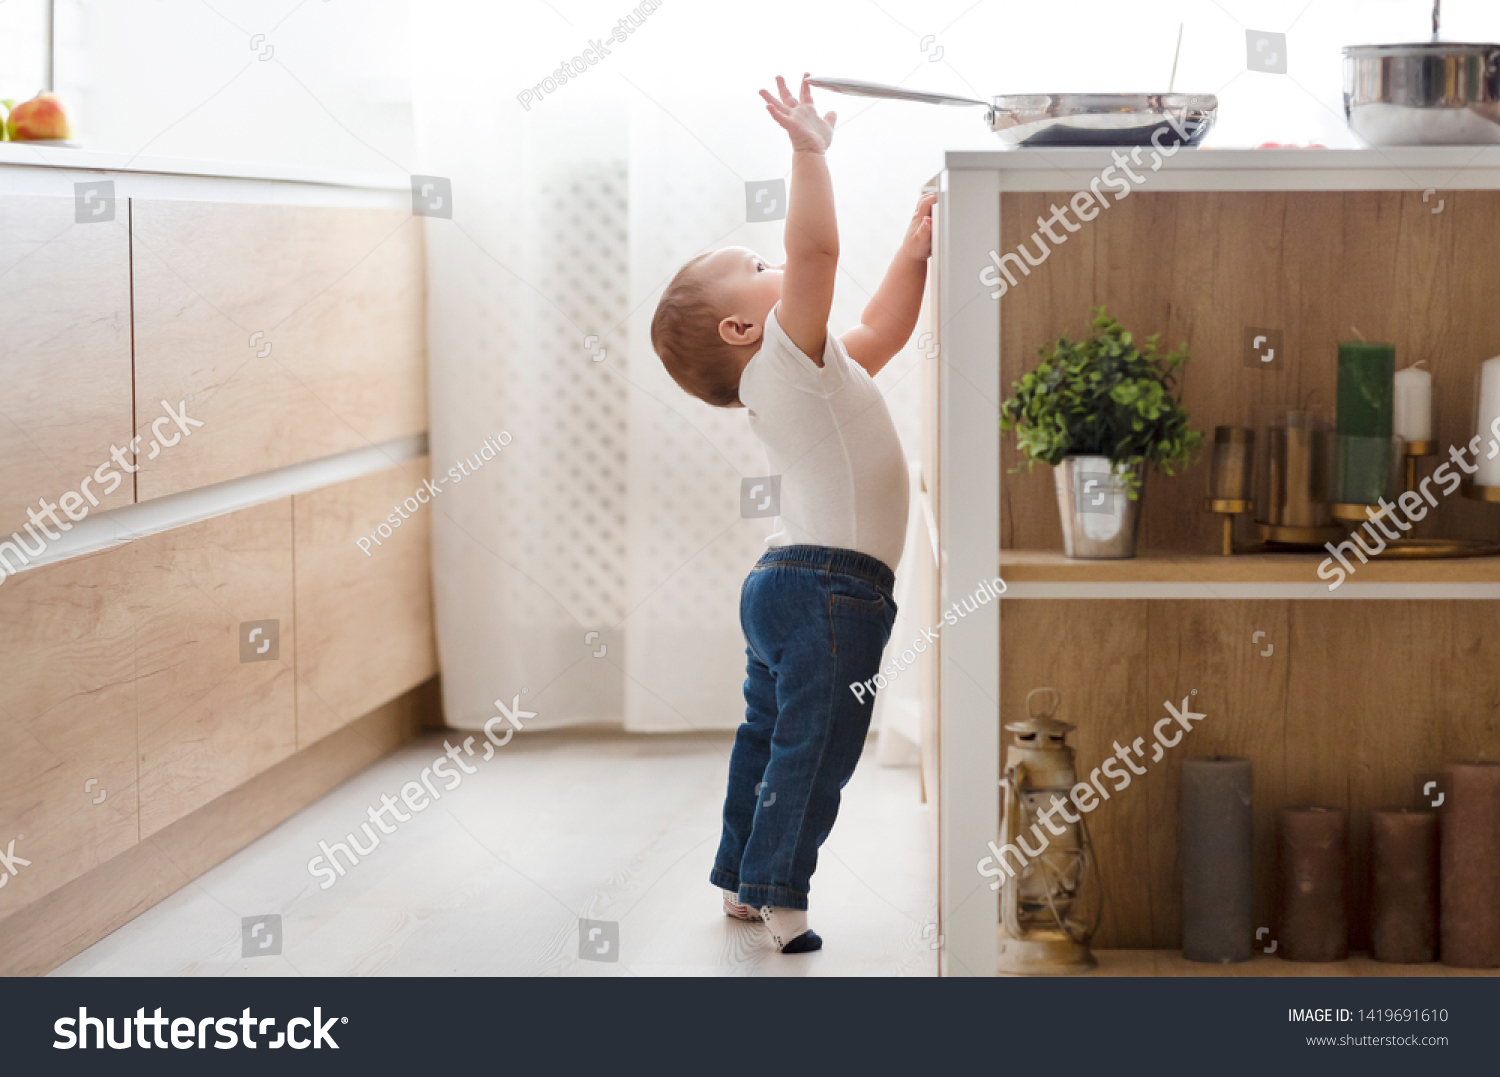 Child safety at home concept. Little baby reaching for hot pan on stove in kitchen, empty space #1419691610